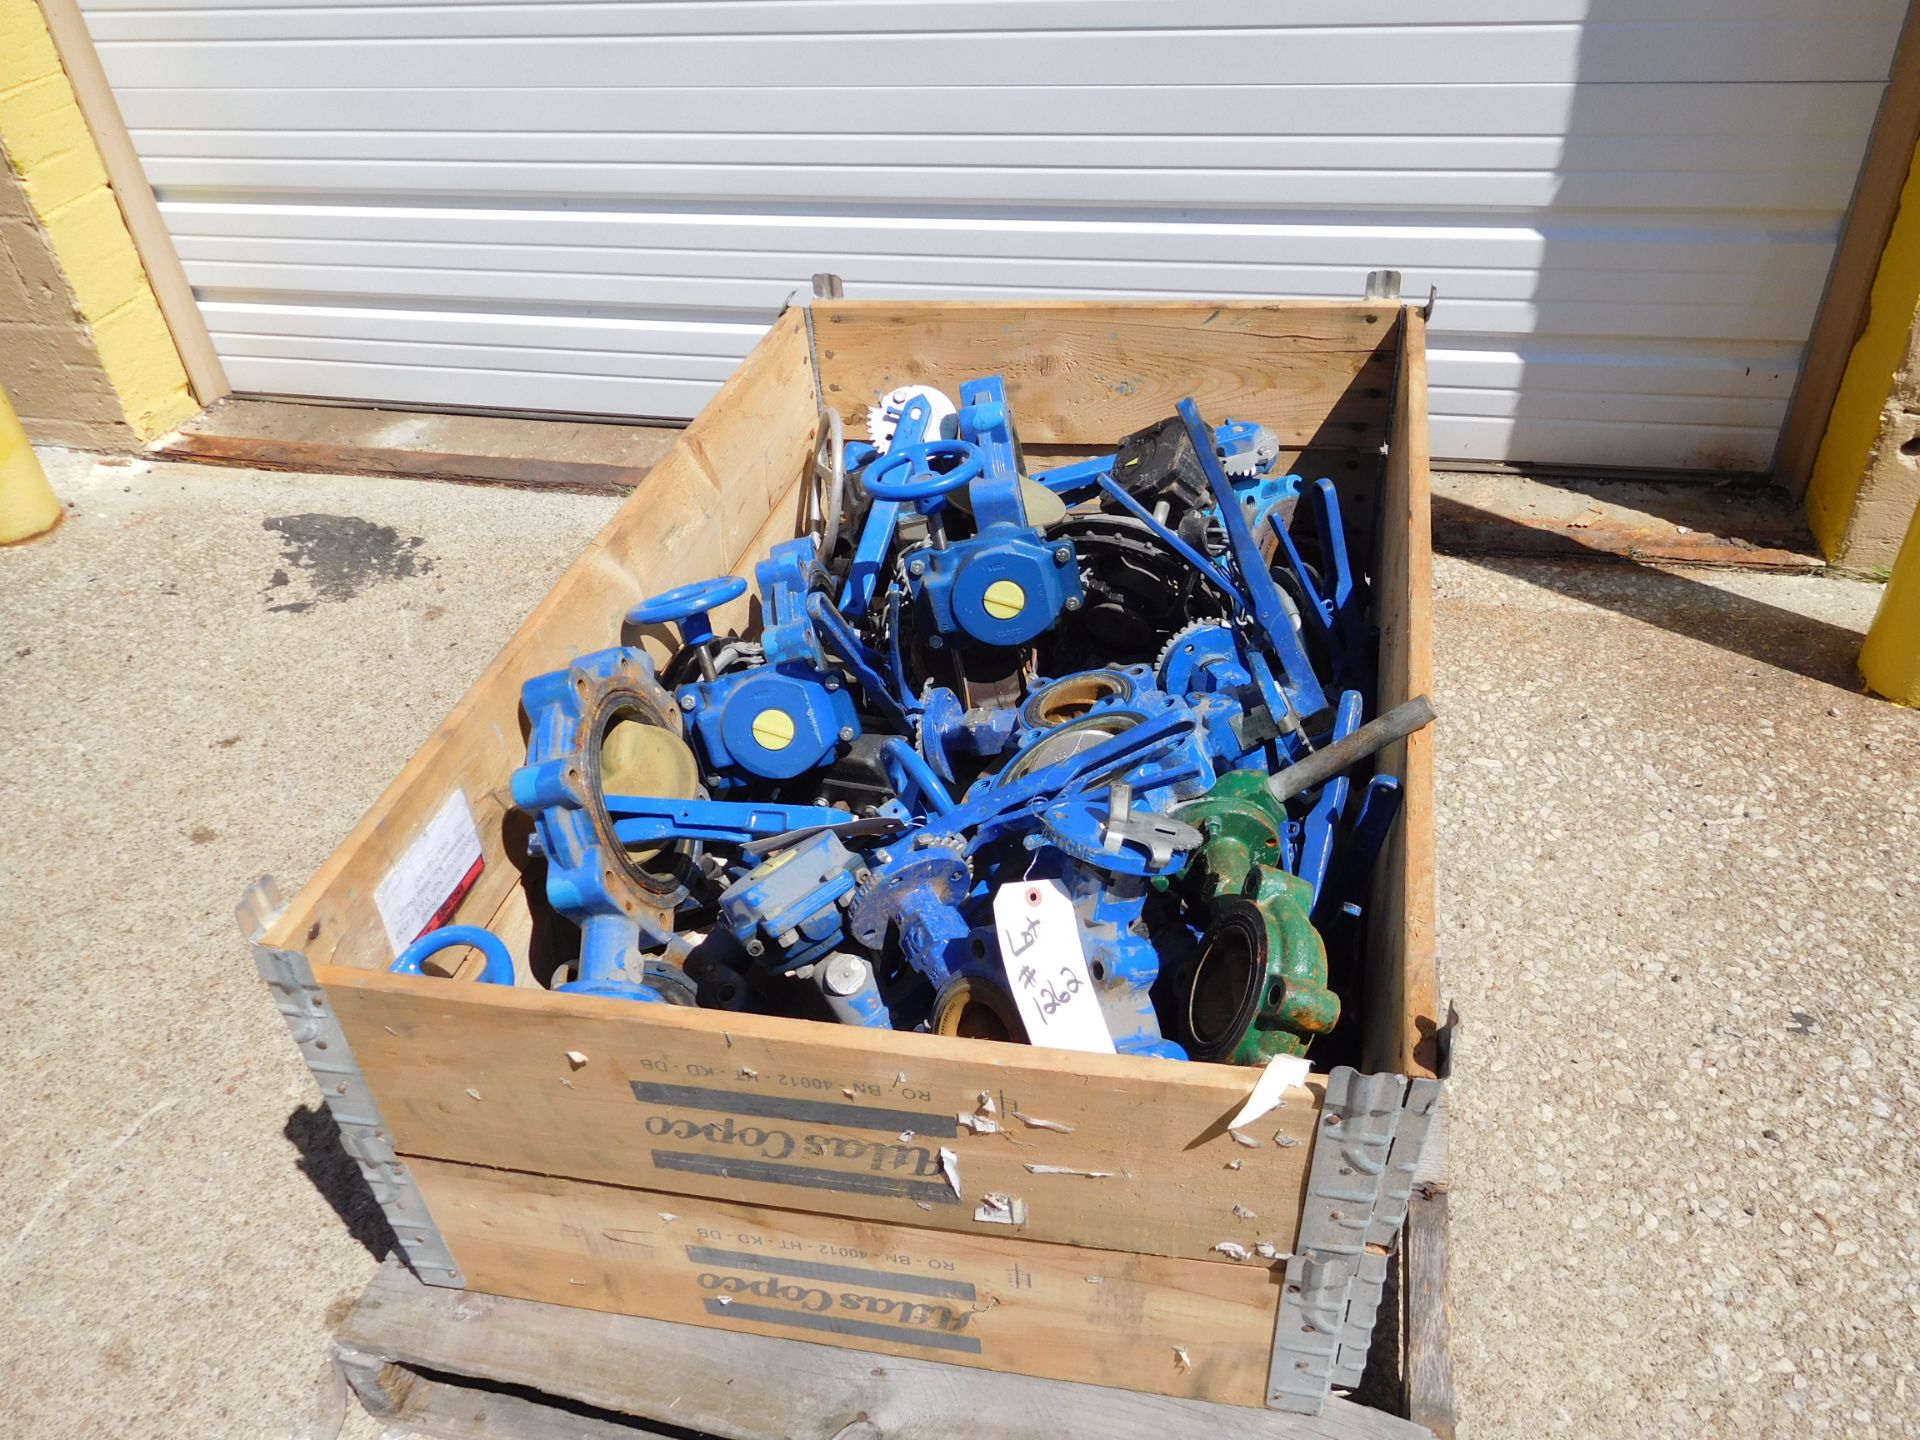 Bin of Gate Valves Sizes from 3"-8" (approx. 20 quantity)